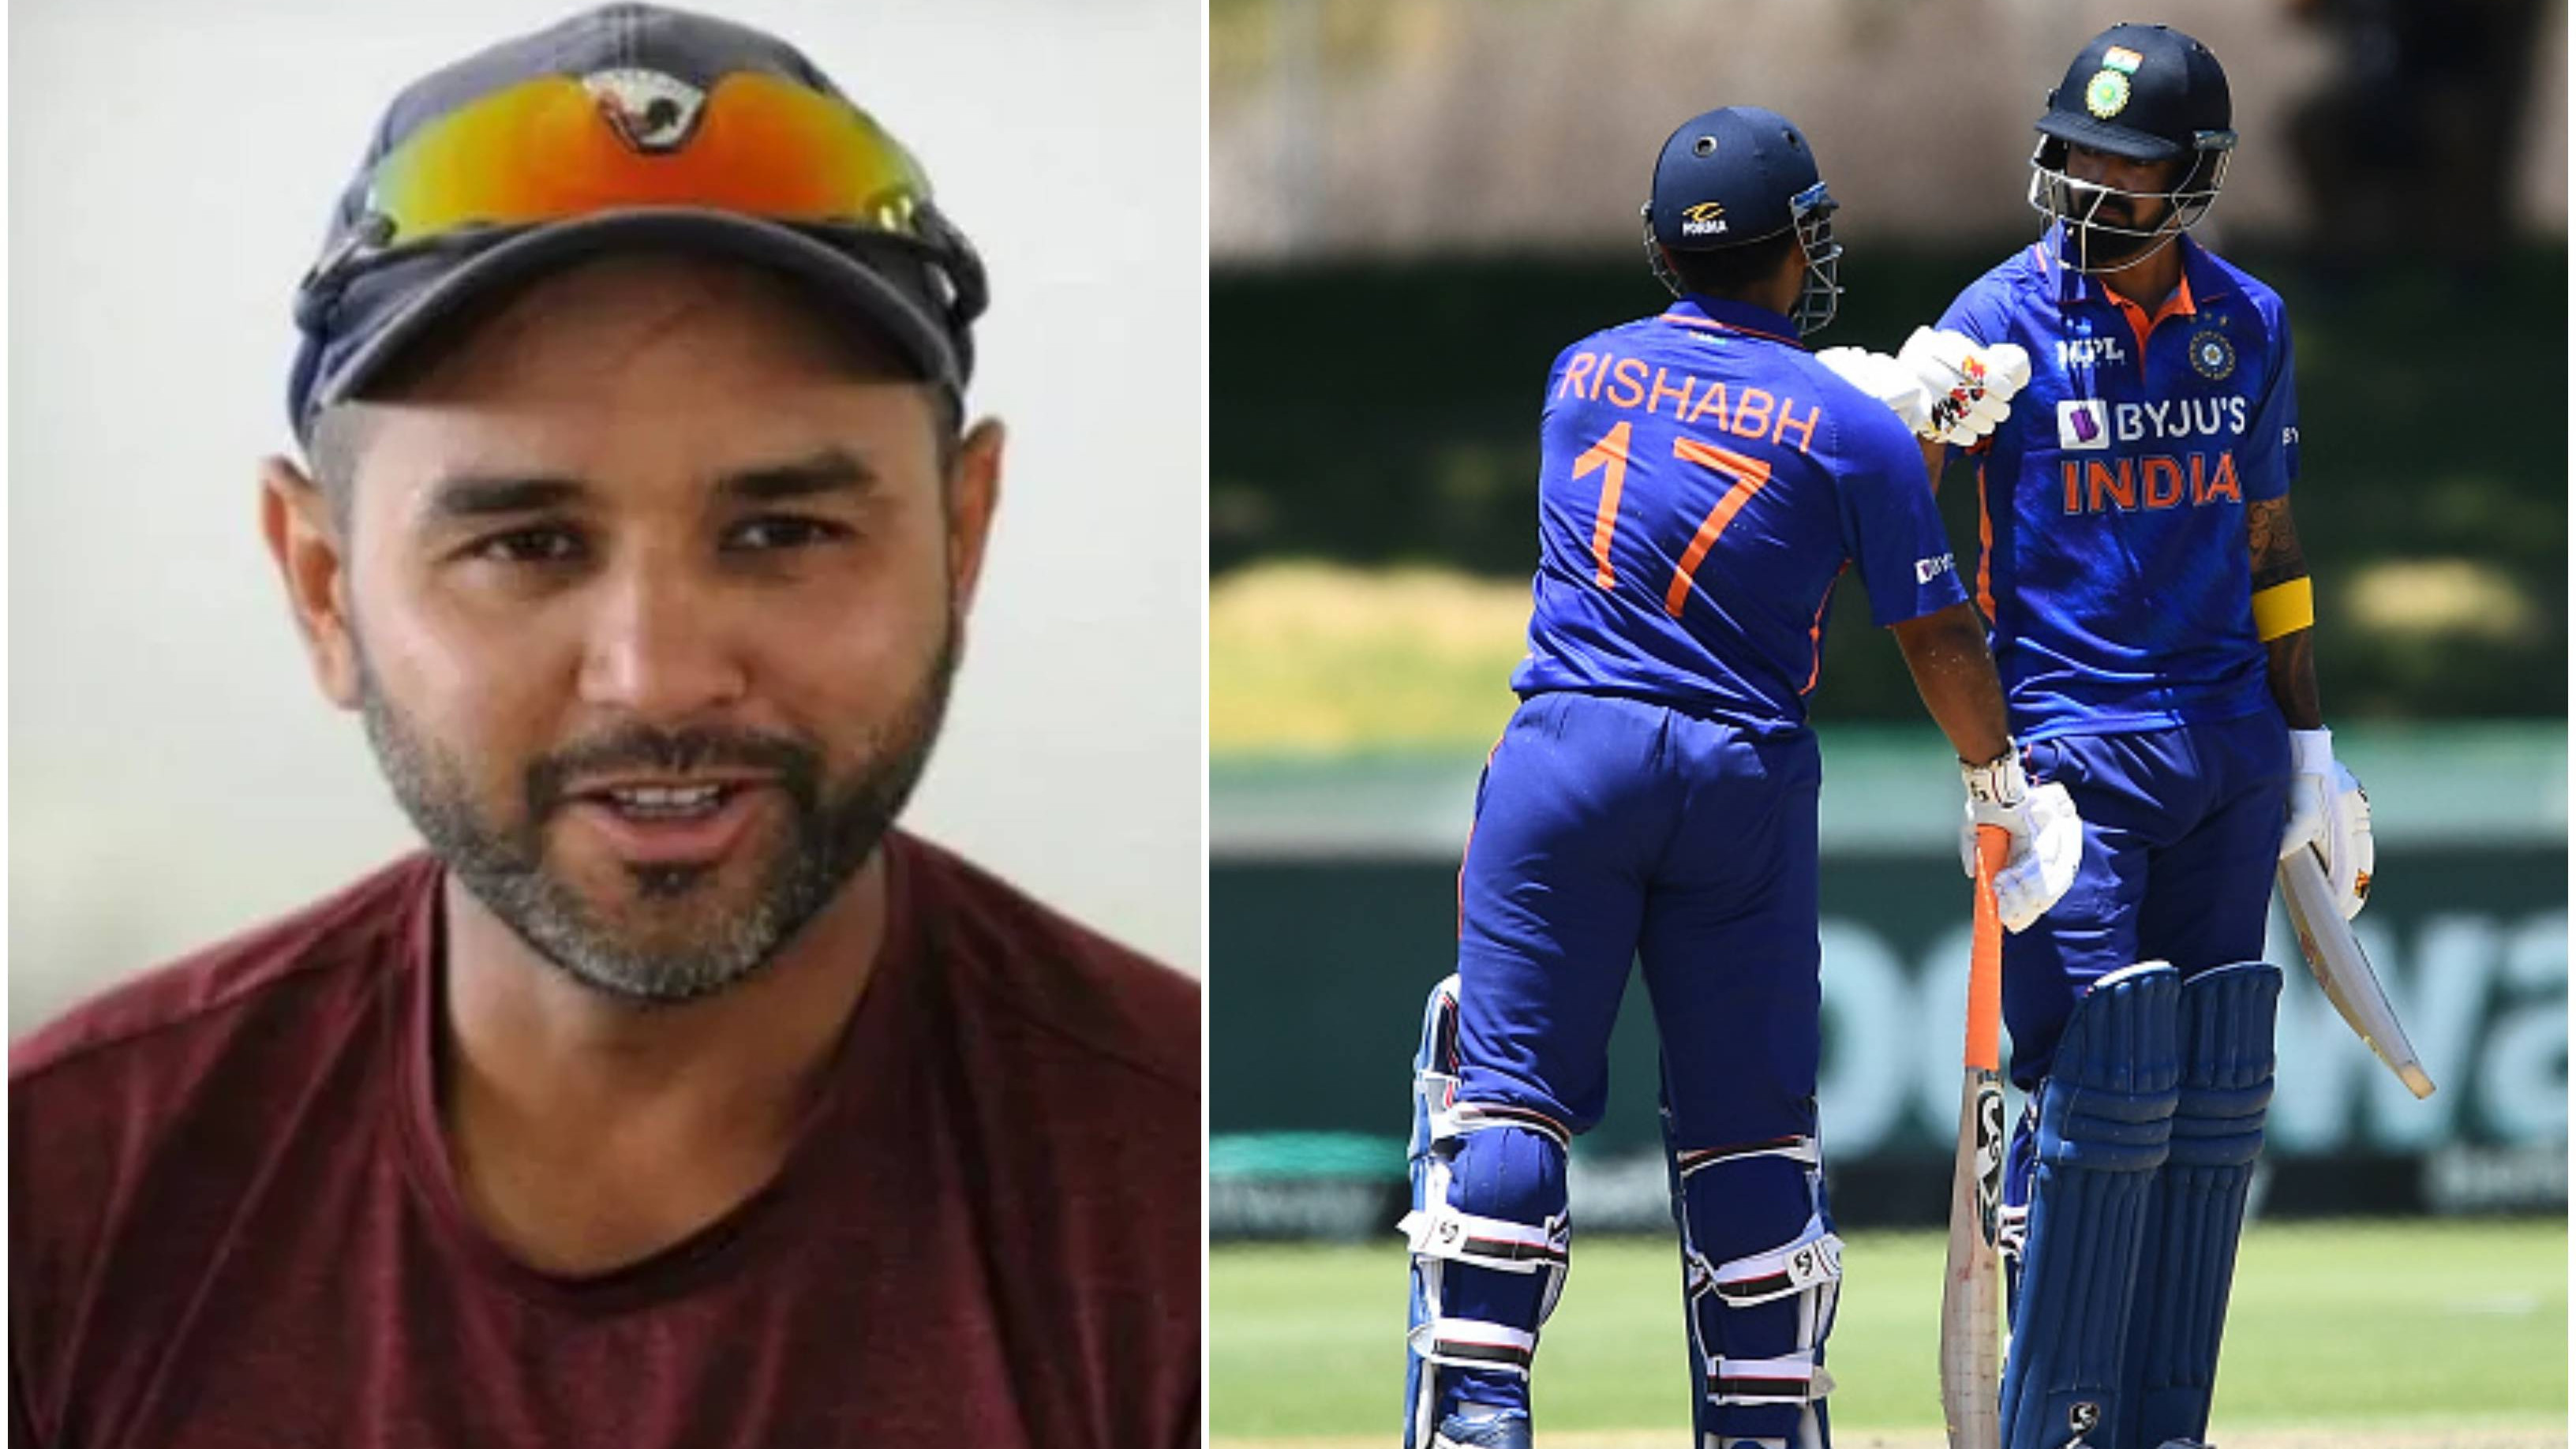 ‘Rishabh Pant and KL Rahul have been a work in progress as captains’: Parthiv Patel